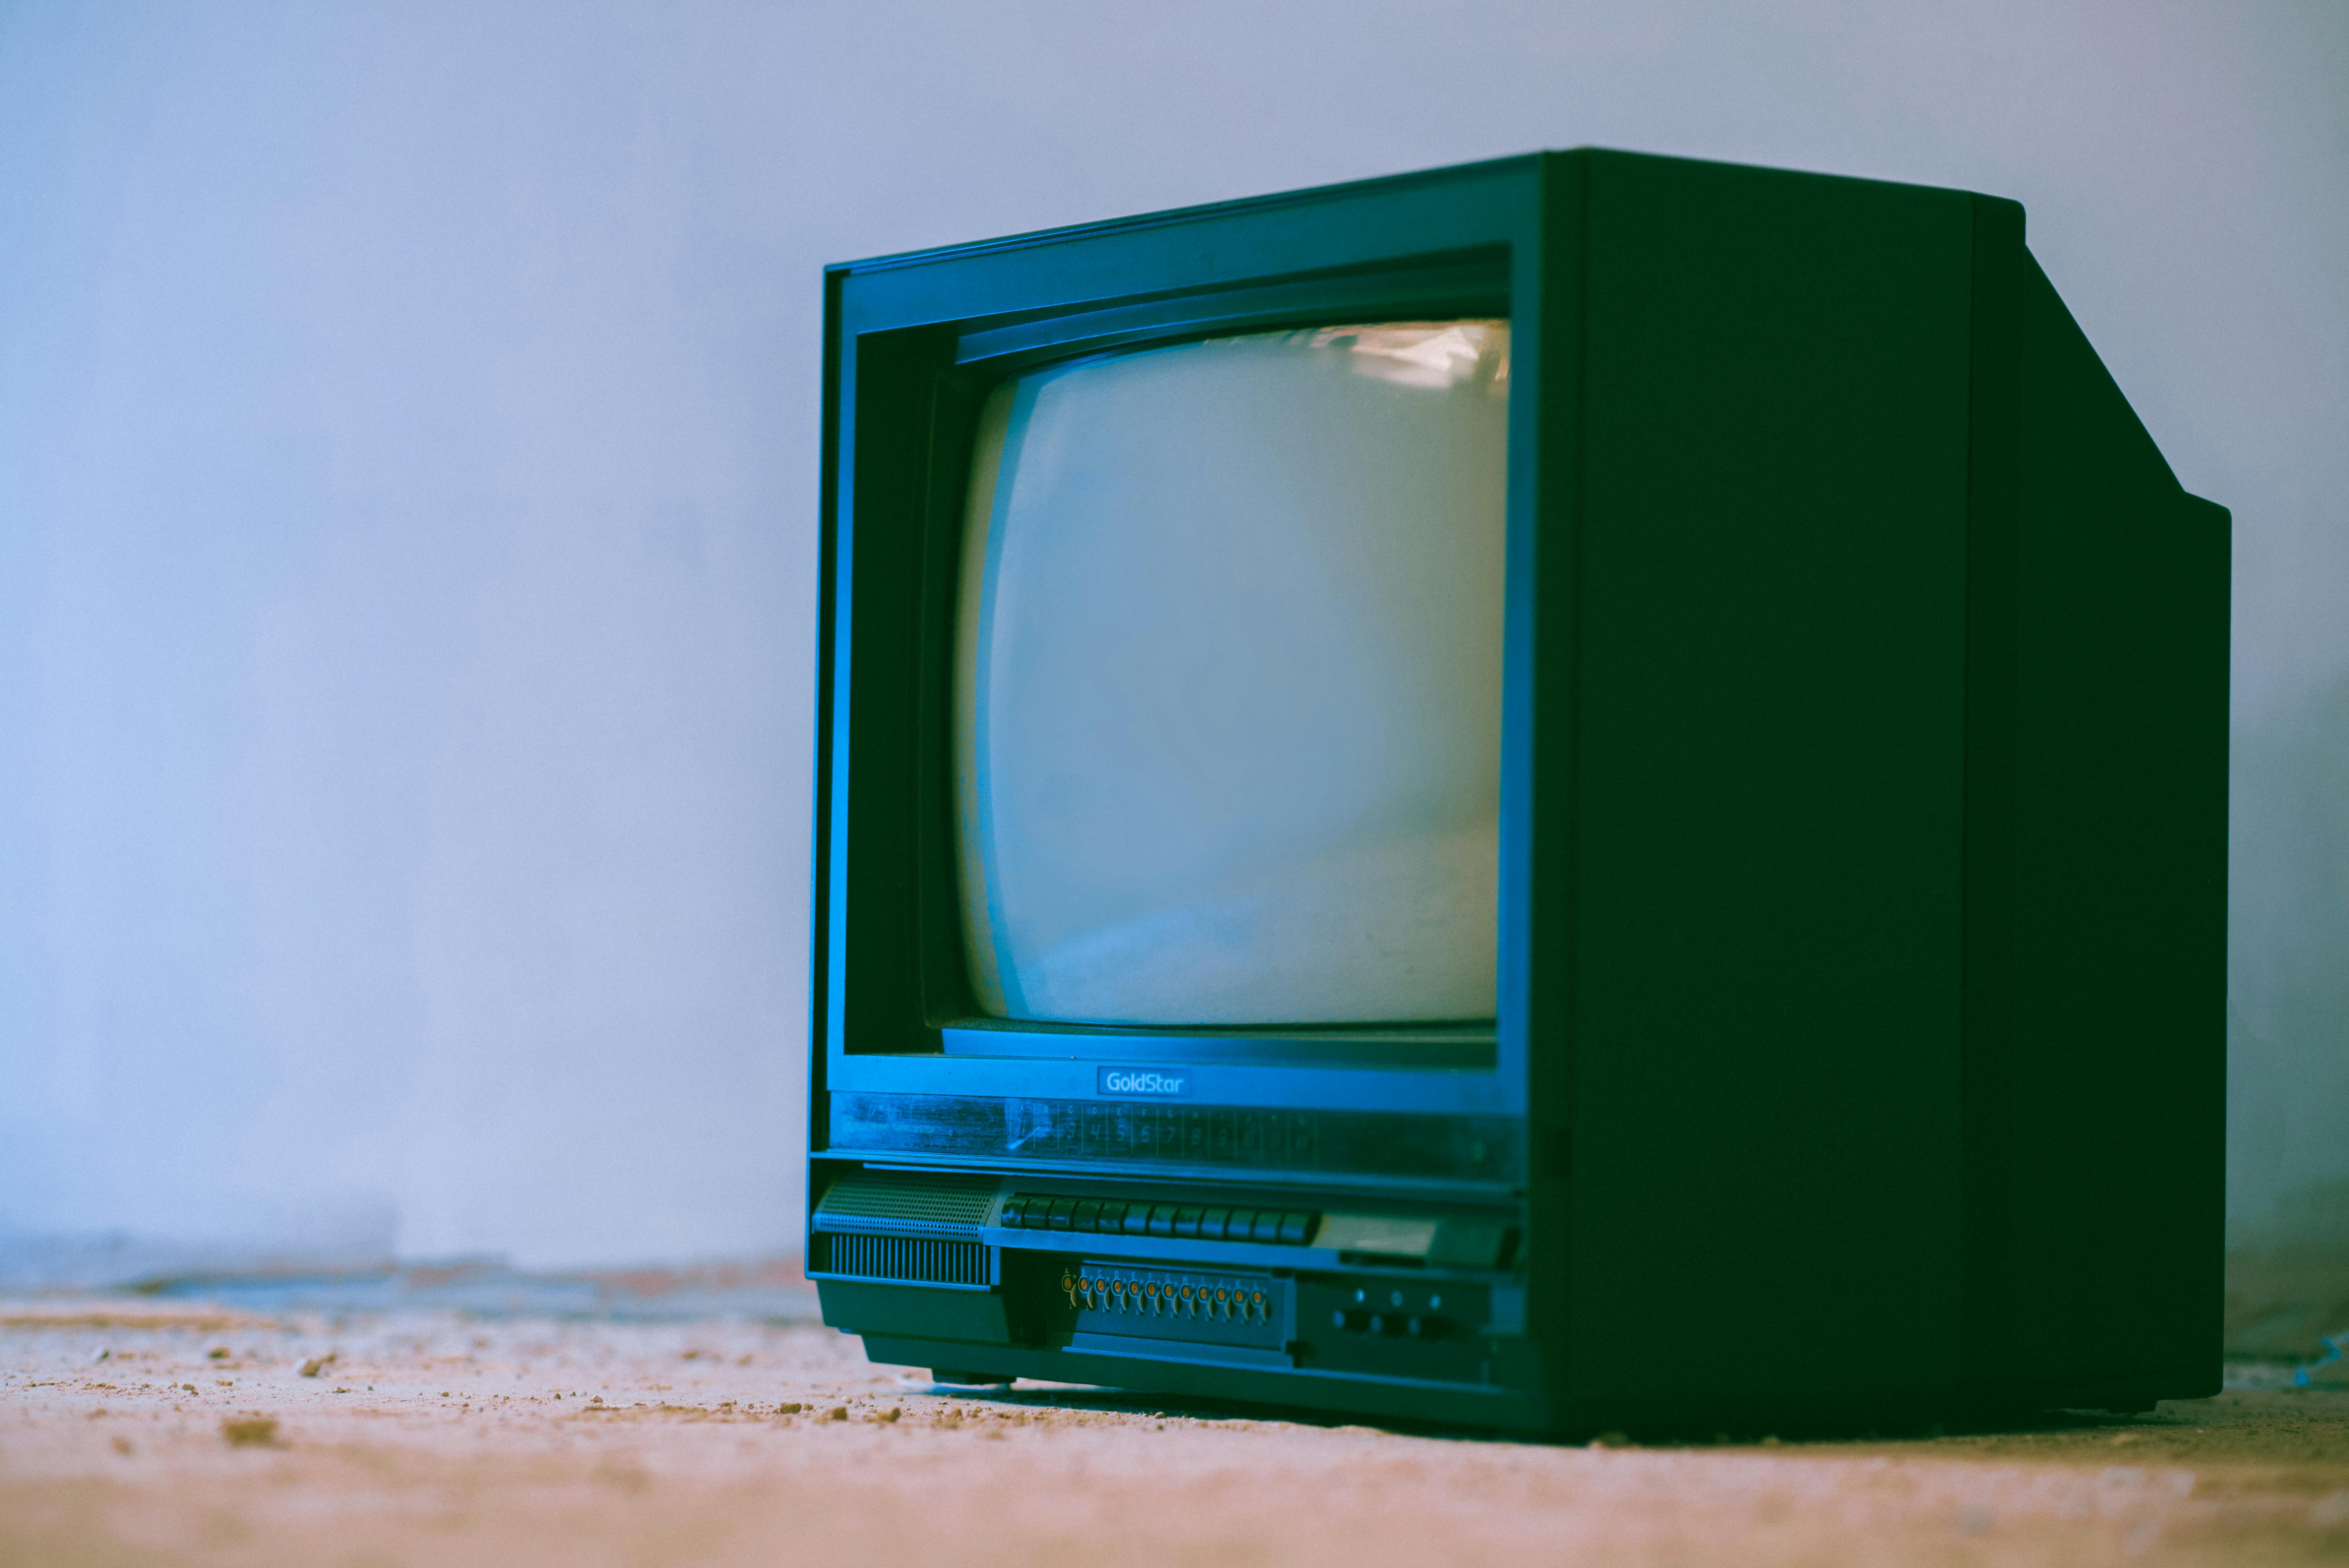 An old television on the rough floor in the house. | Photo: Pexels